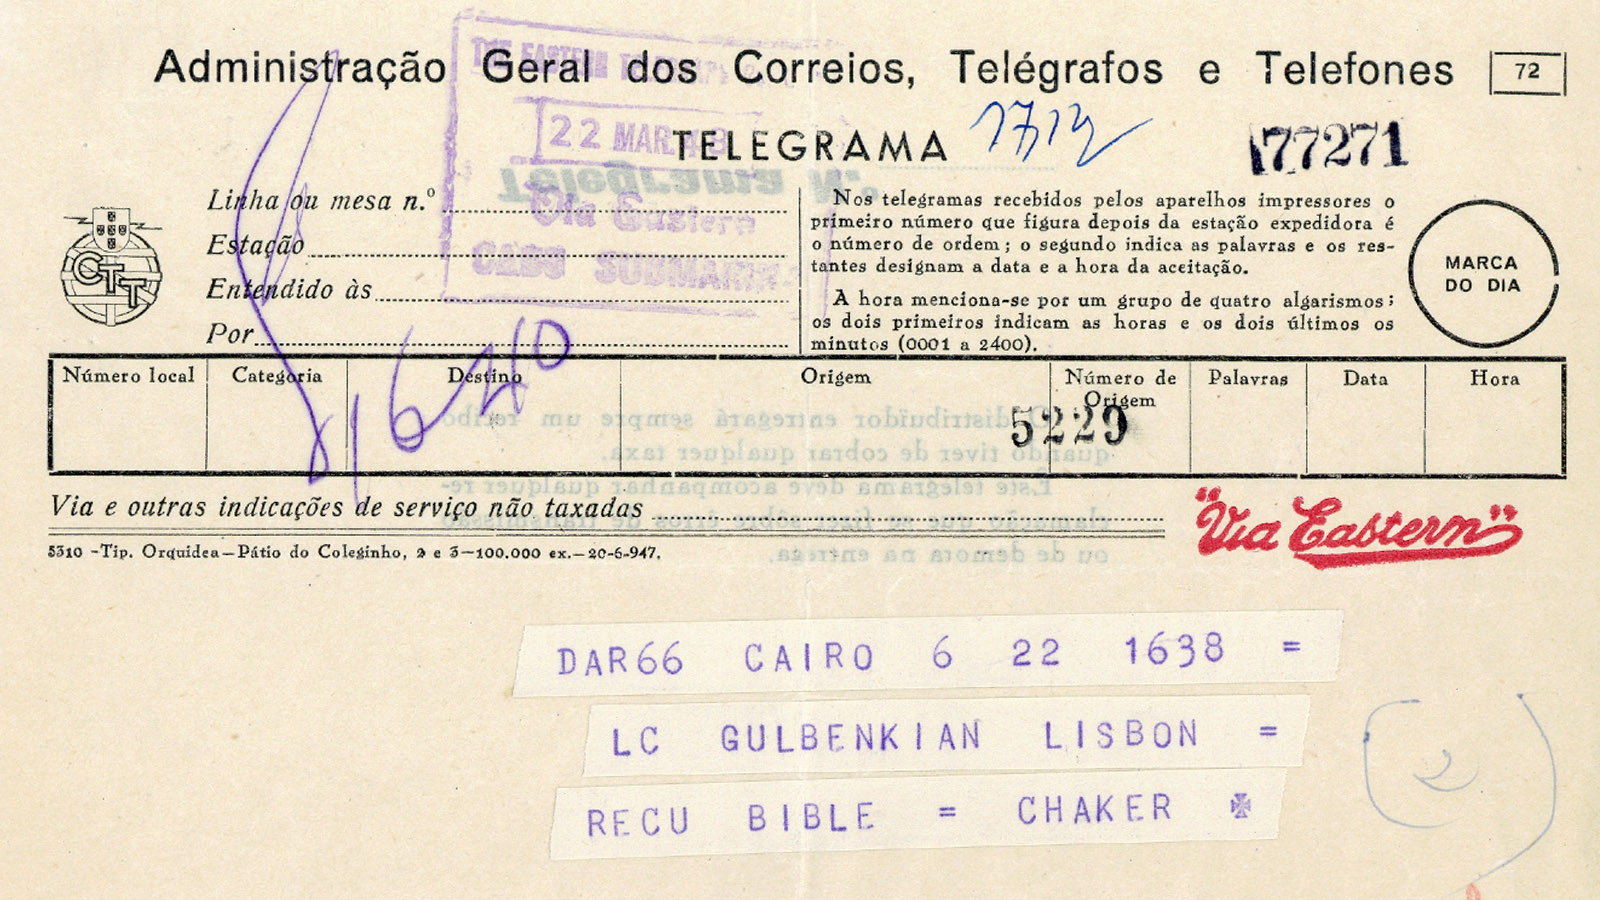 Telegram from Janig H. Chaker to Calouste Gulbenkian confirming the arrival of the Gospel book in Egypt. Cairo, 1948. Gulbenkian Archives PRS 01487.